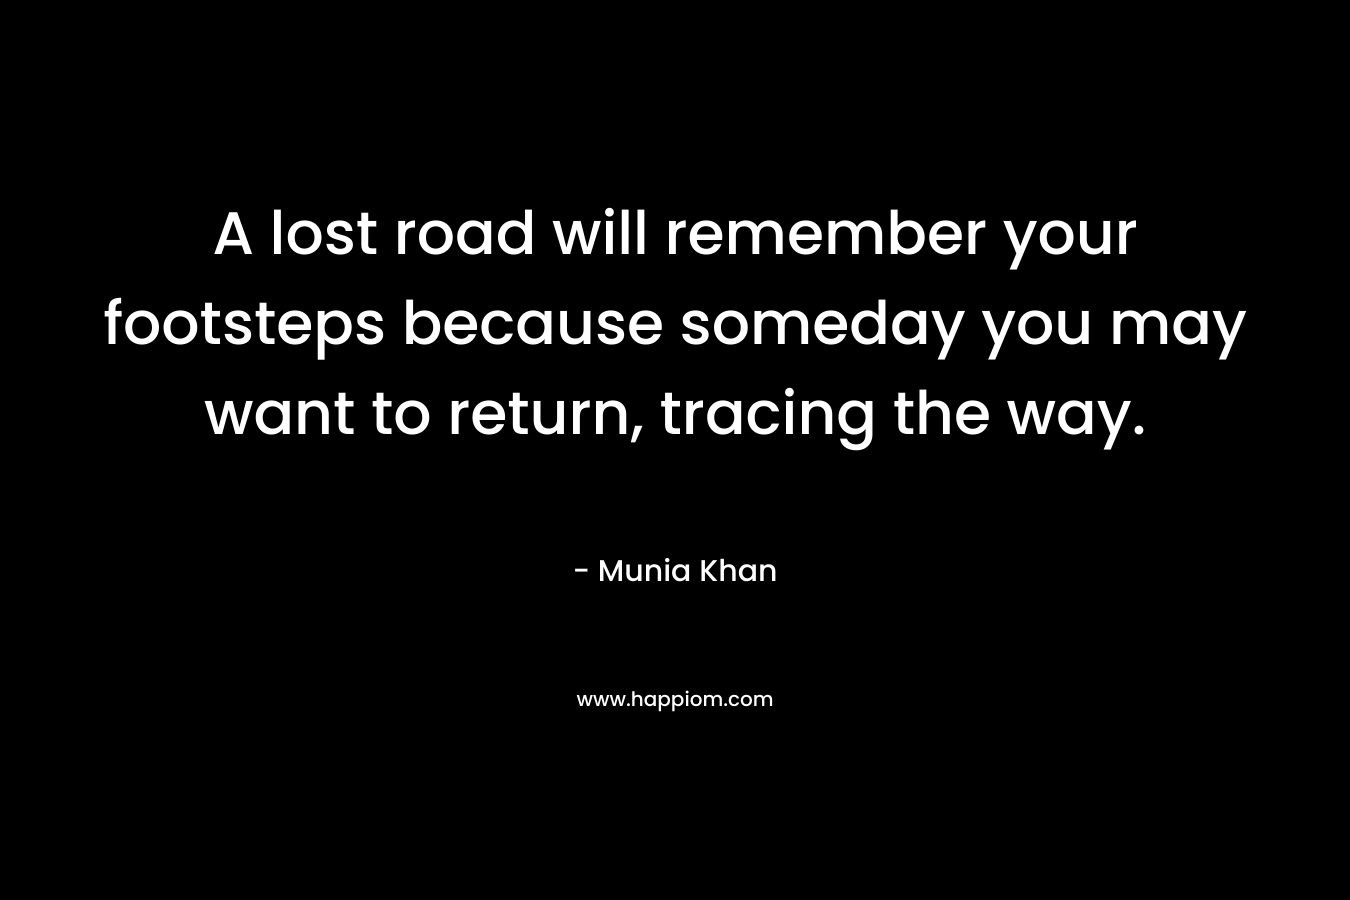 A lost road will remember your footsteps because someday you may want to return, tracing the way. – Munia Khan